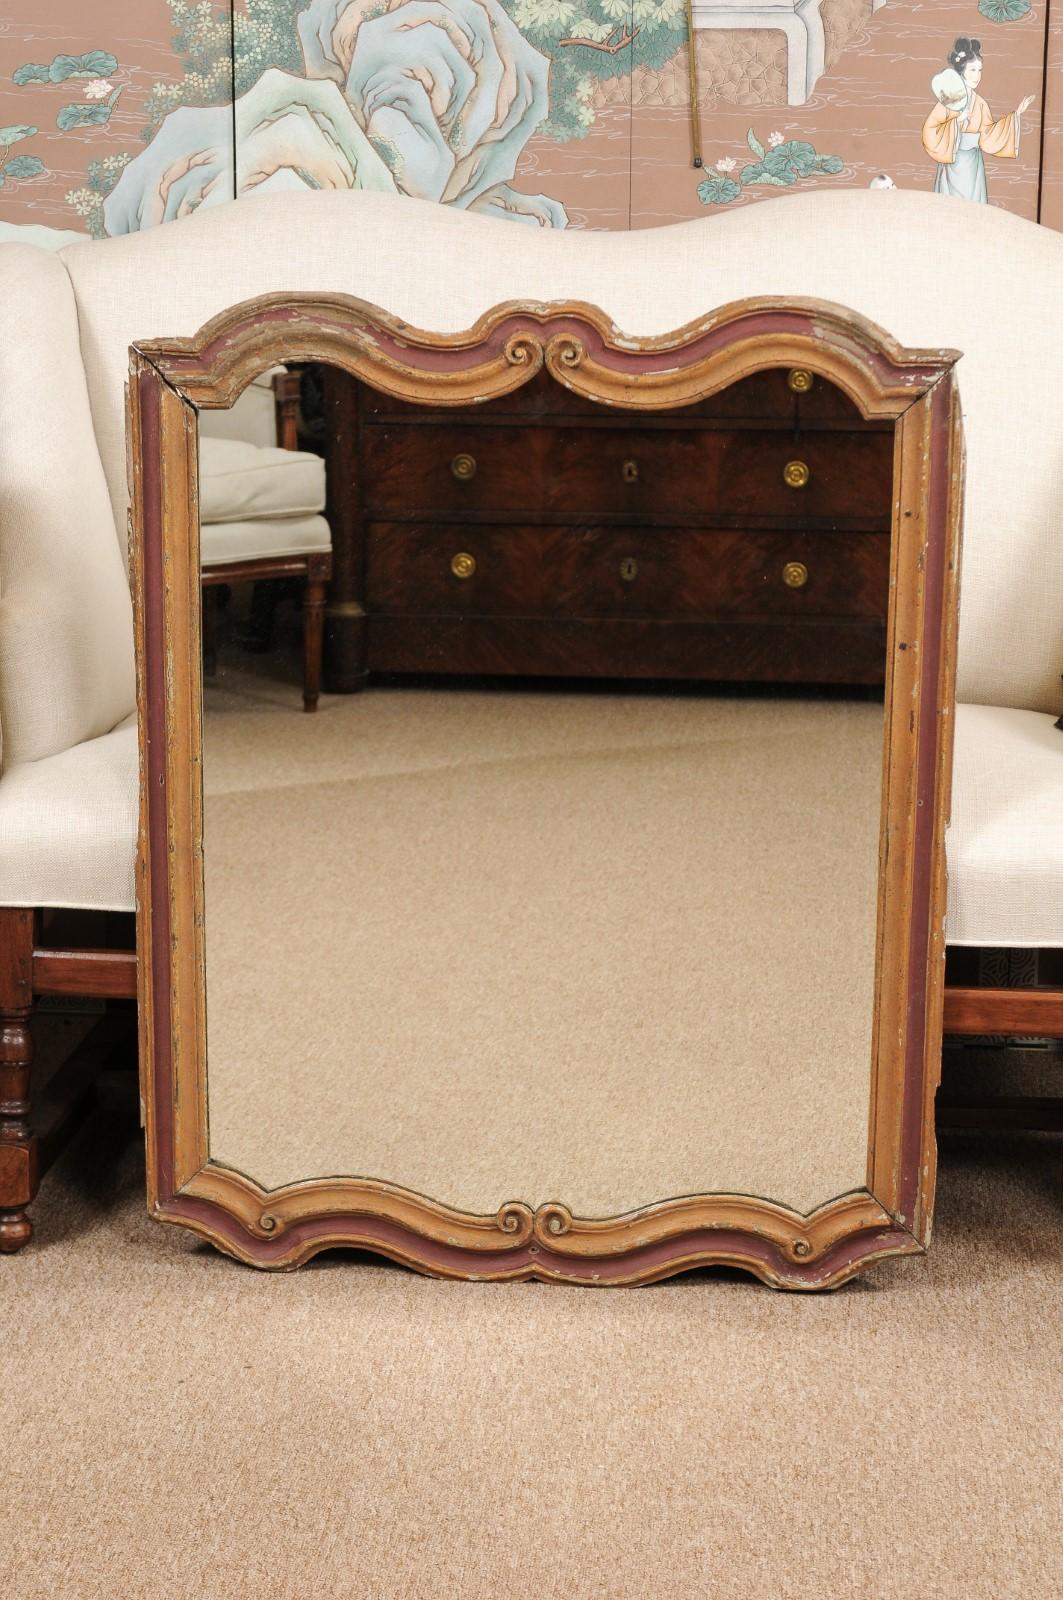 Rococo style burgundy and gold painted frame, 19th century Italy, fitted with new mirror plate.